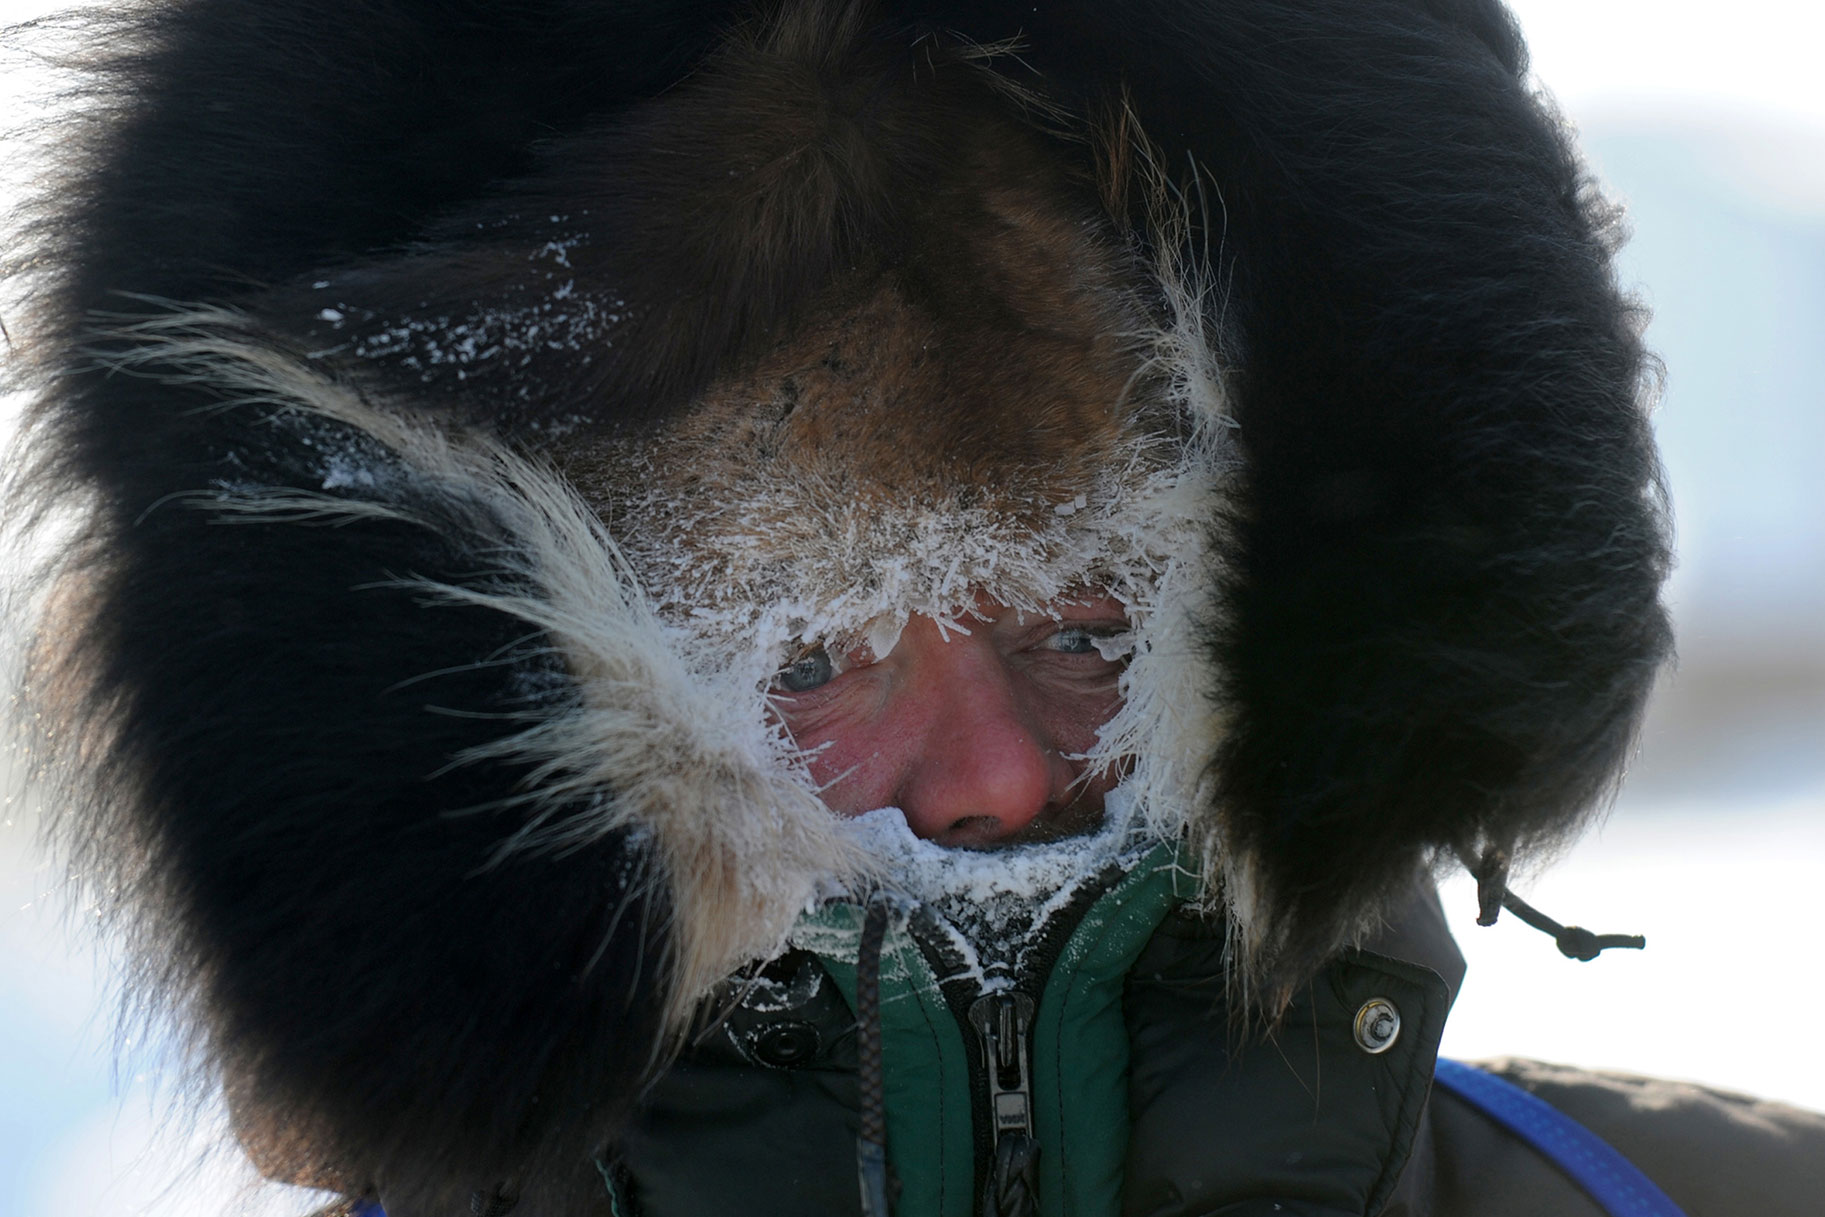 Dallas Seavey arrives at the Unalakleet, Alaska checkpoint on Sunday, March 14, 2010, during the 2010 Iditarod Sled Dog Race